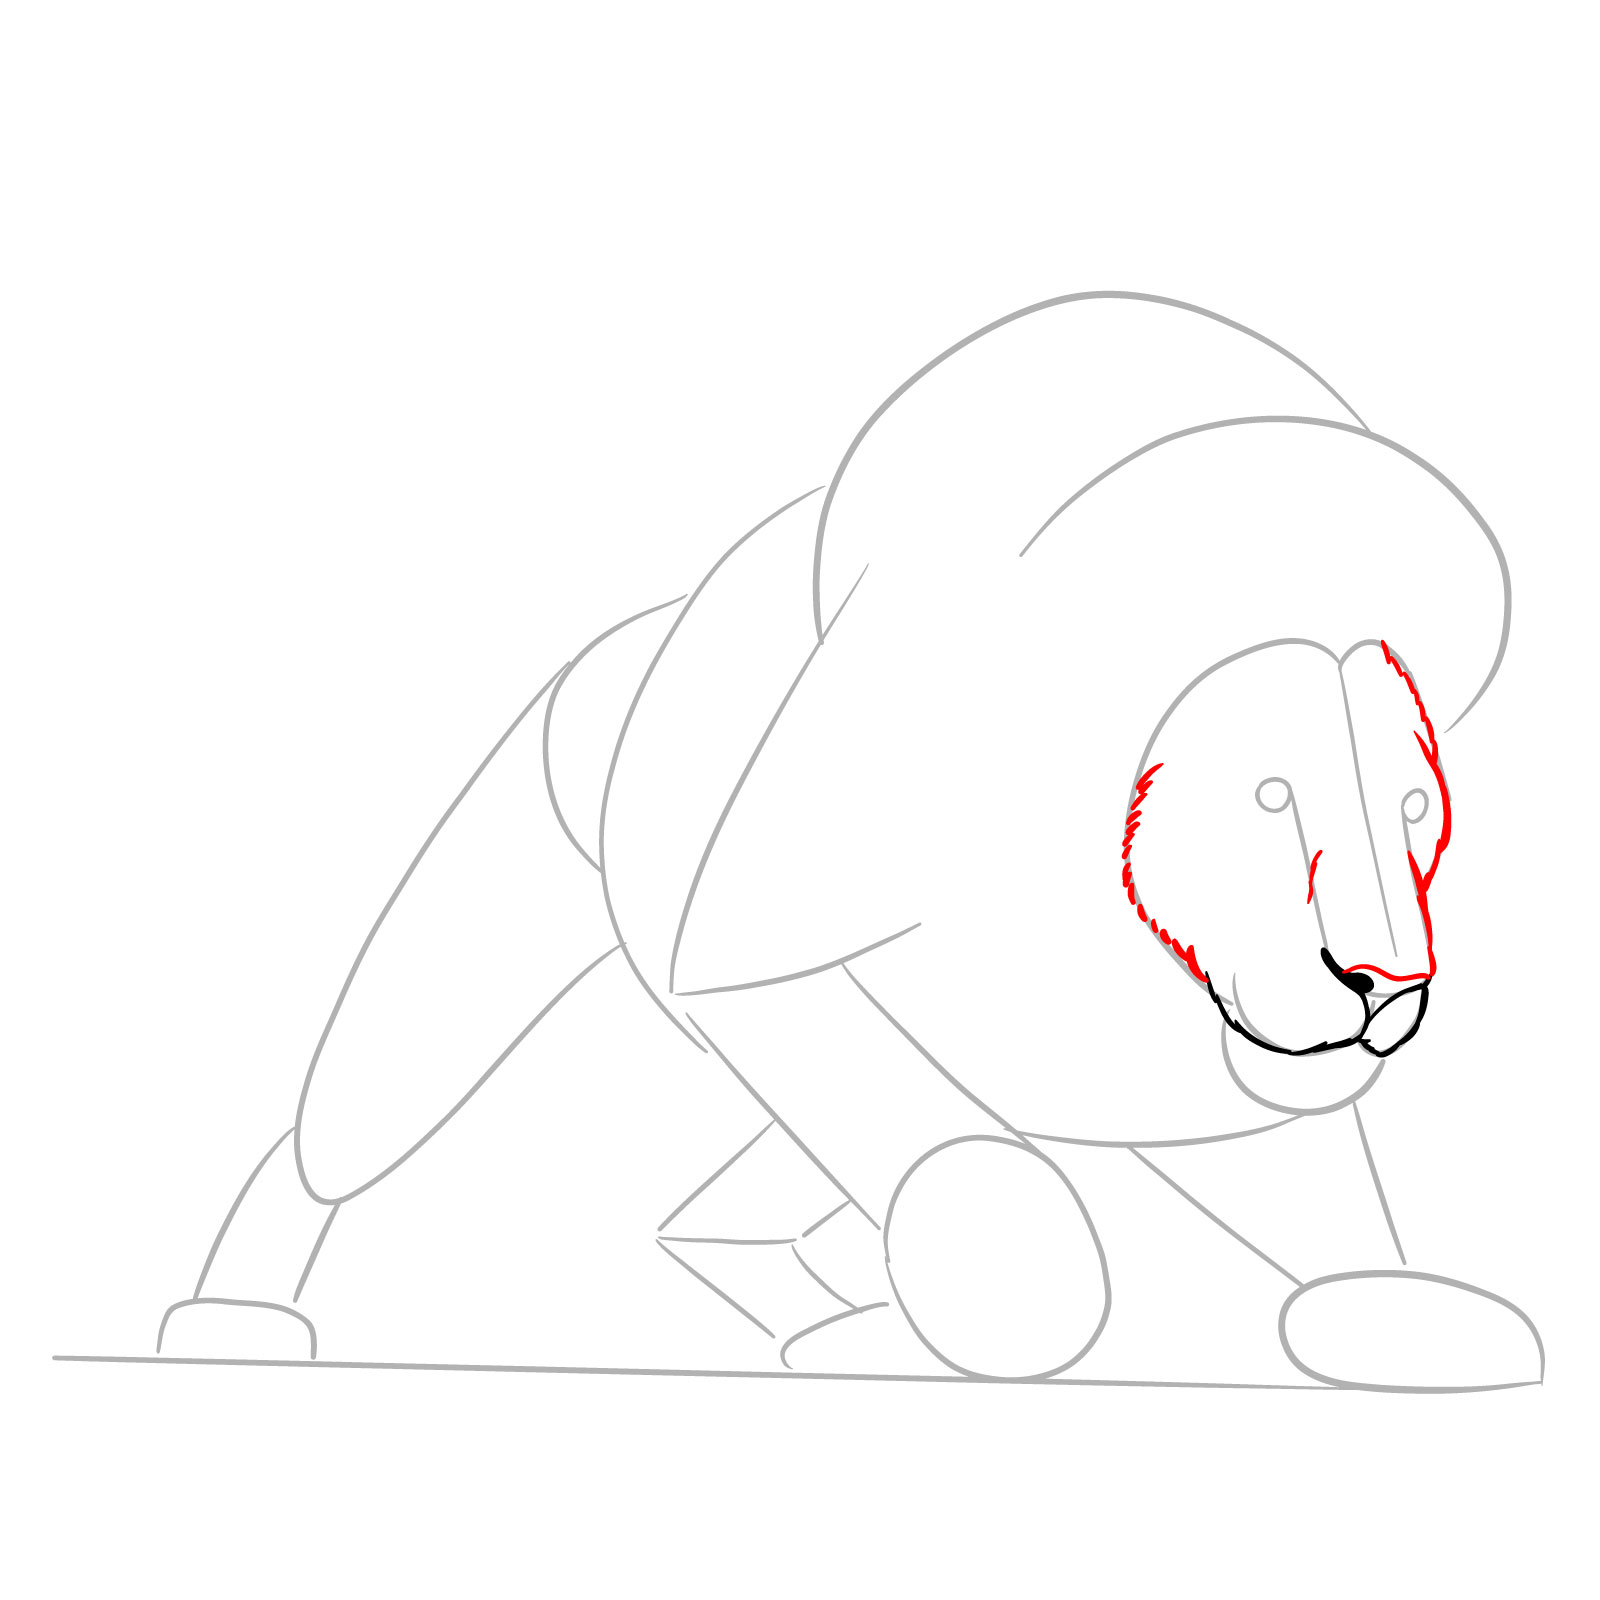 How to draw a hunting lion - Step 5: Nose bridge and face framing